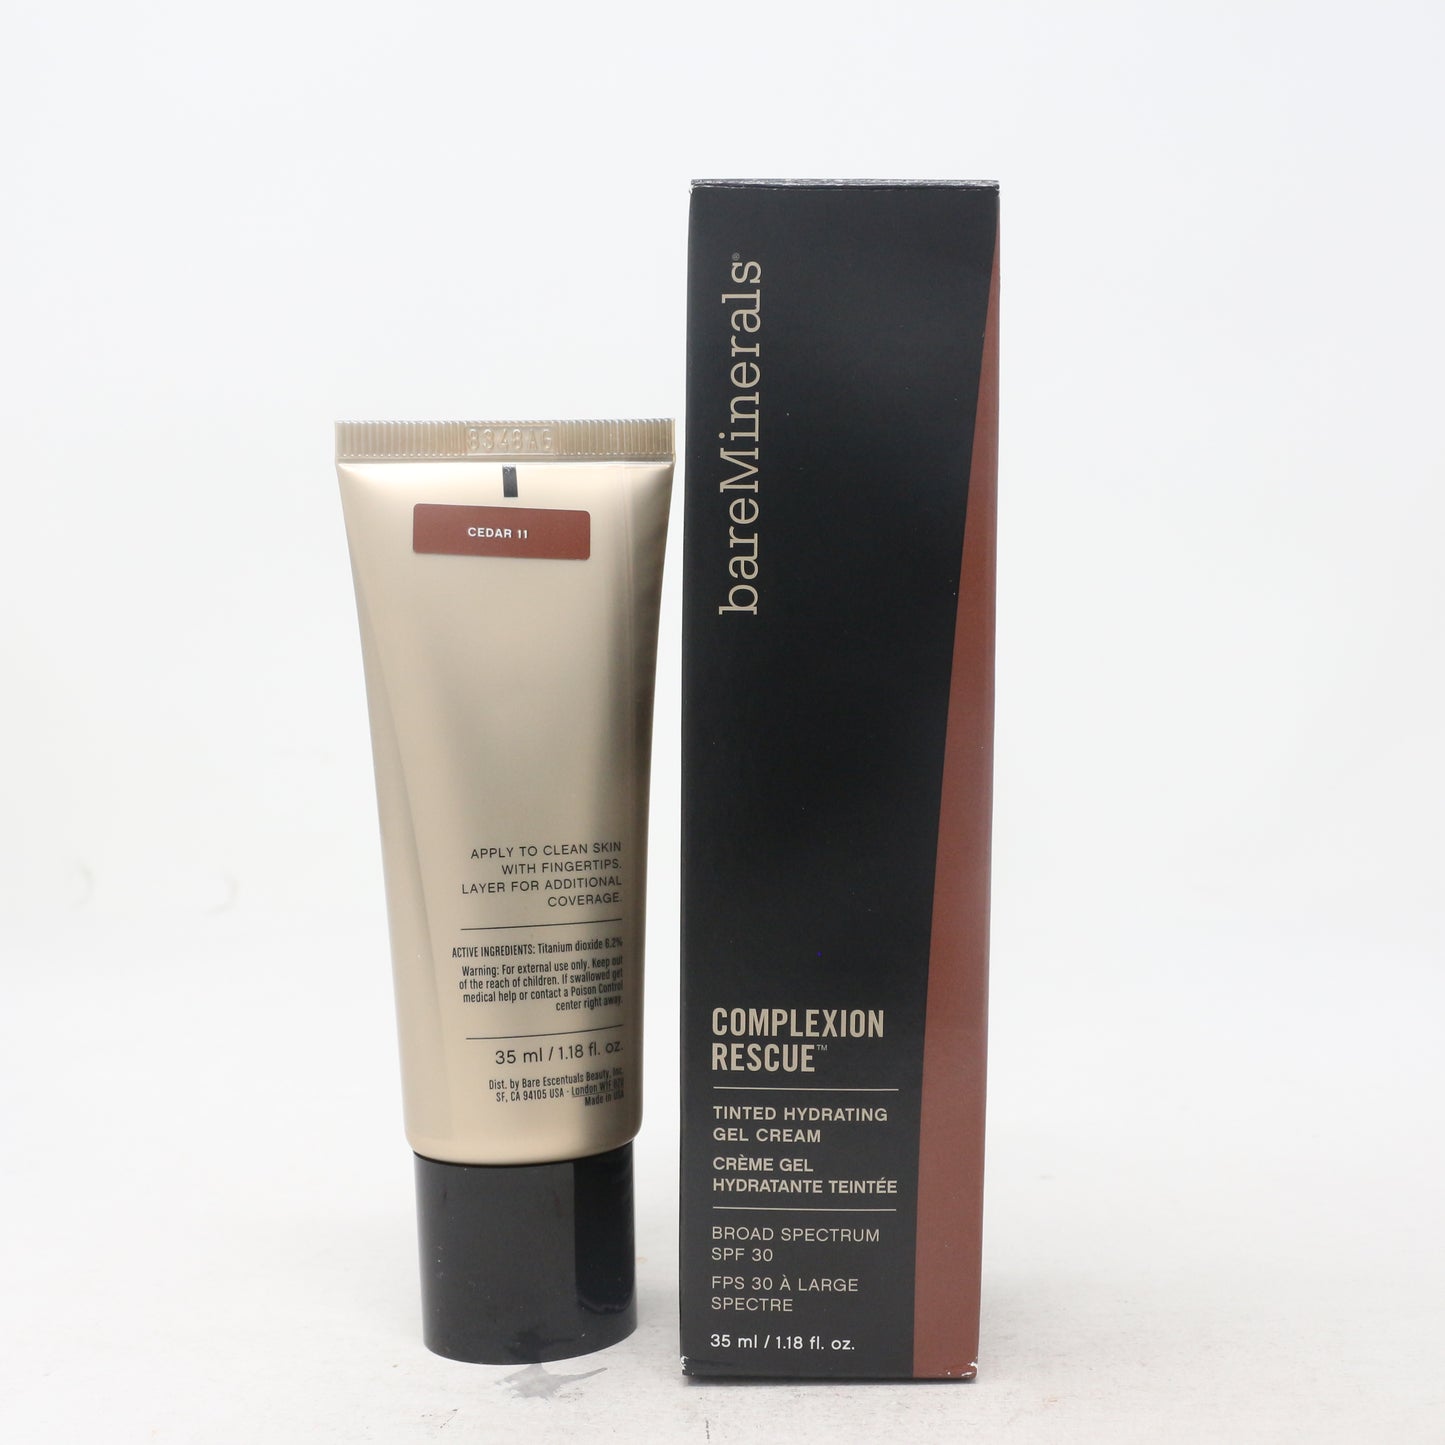 Complexion Rescue Tinted Hydrating Gel Cream 35 ml